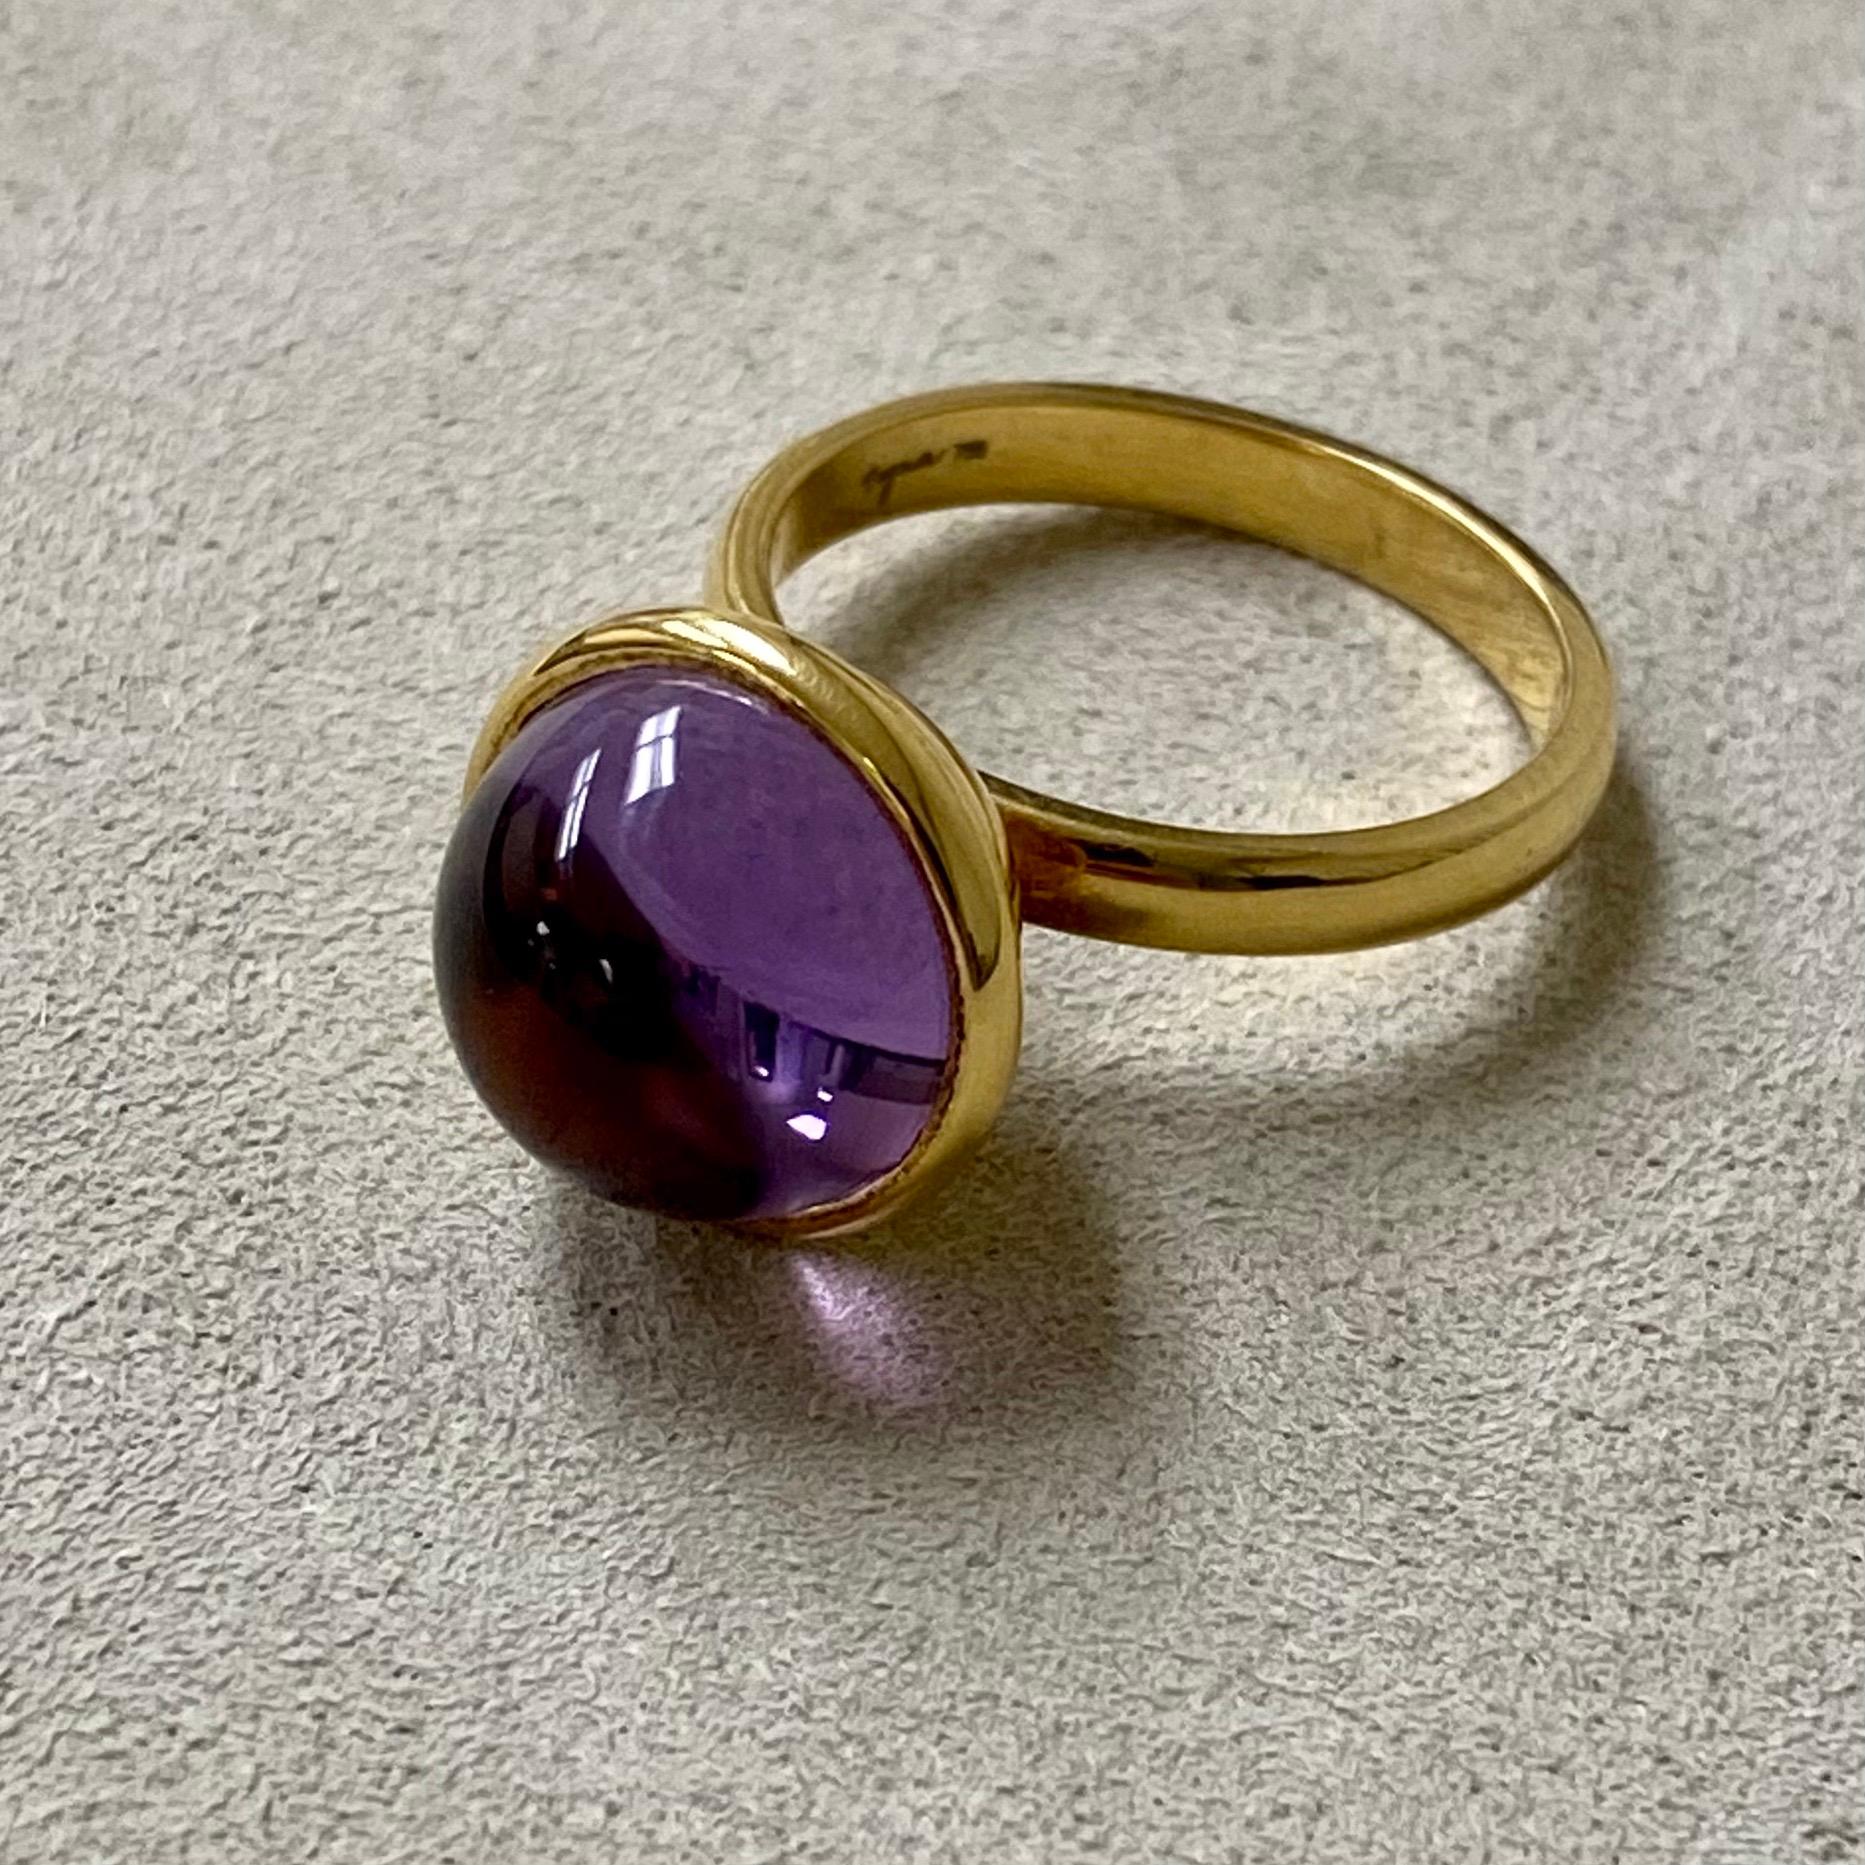 Created in 18 karat yellow gold
Amethyst 7.5 carats approx.
Ring size US 6.0, can be sized upon request.

Fashioned in 18 karat yellow gold, this magnificent ring showcases an opulent 7.5 carat amethyst. Its size is US 6.0, yet it can be sized to